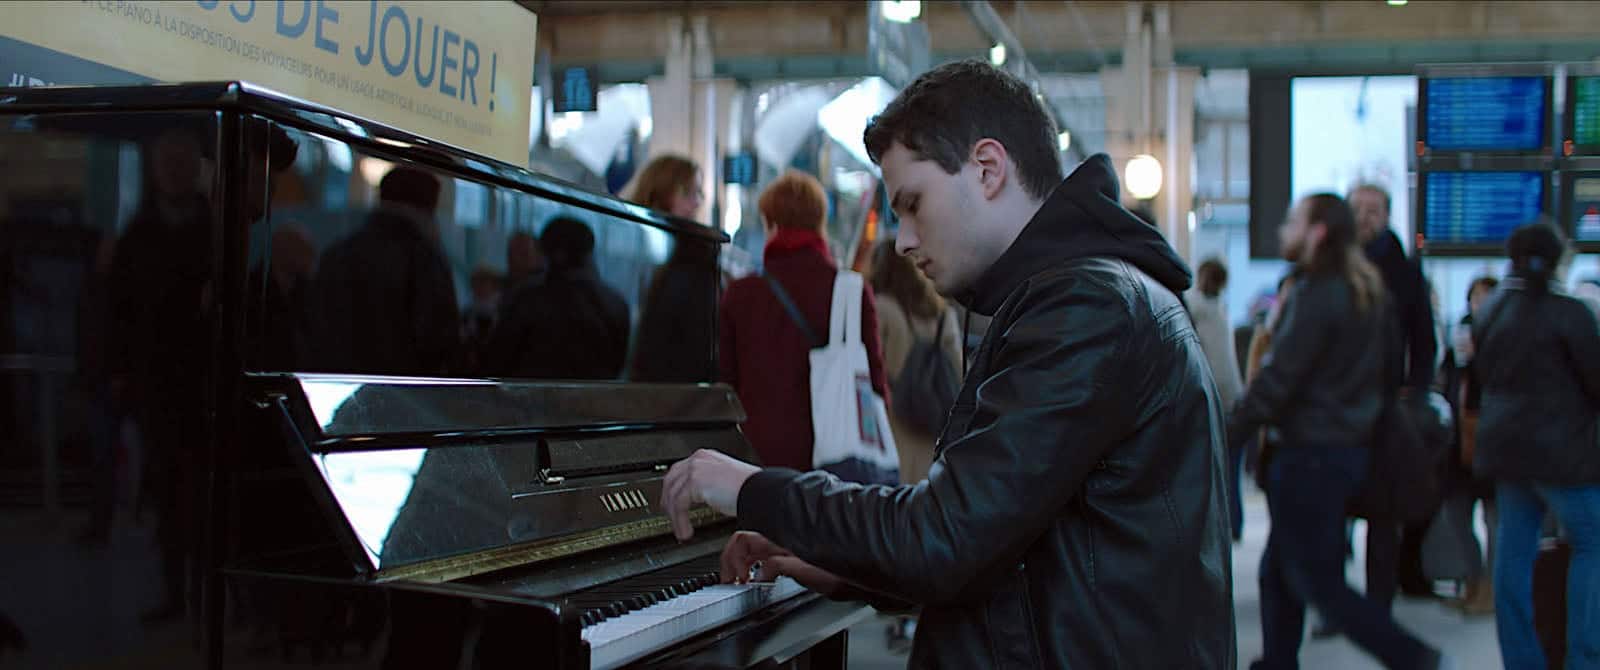 Mathieu plays the train station piano